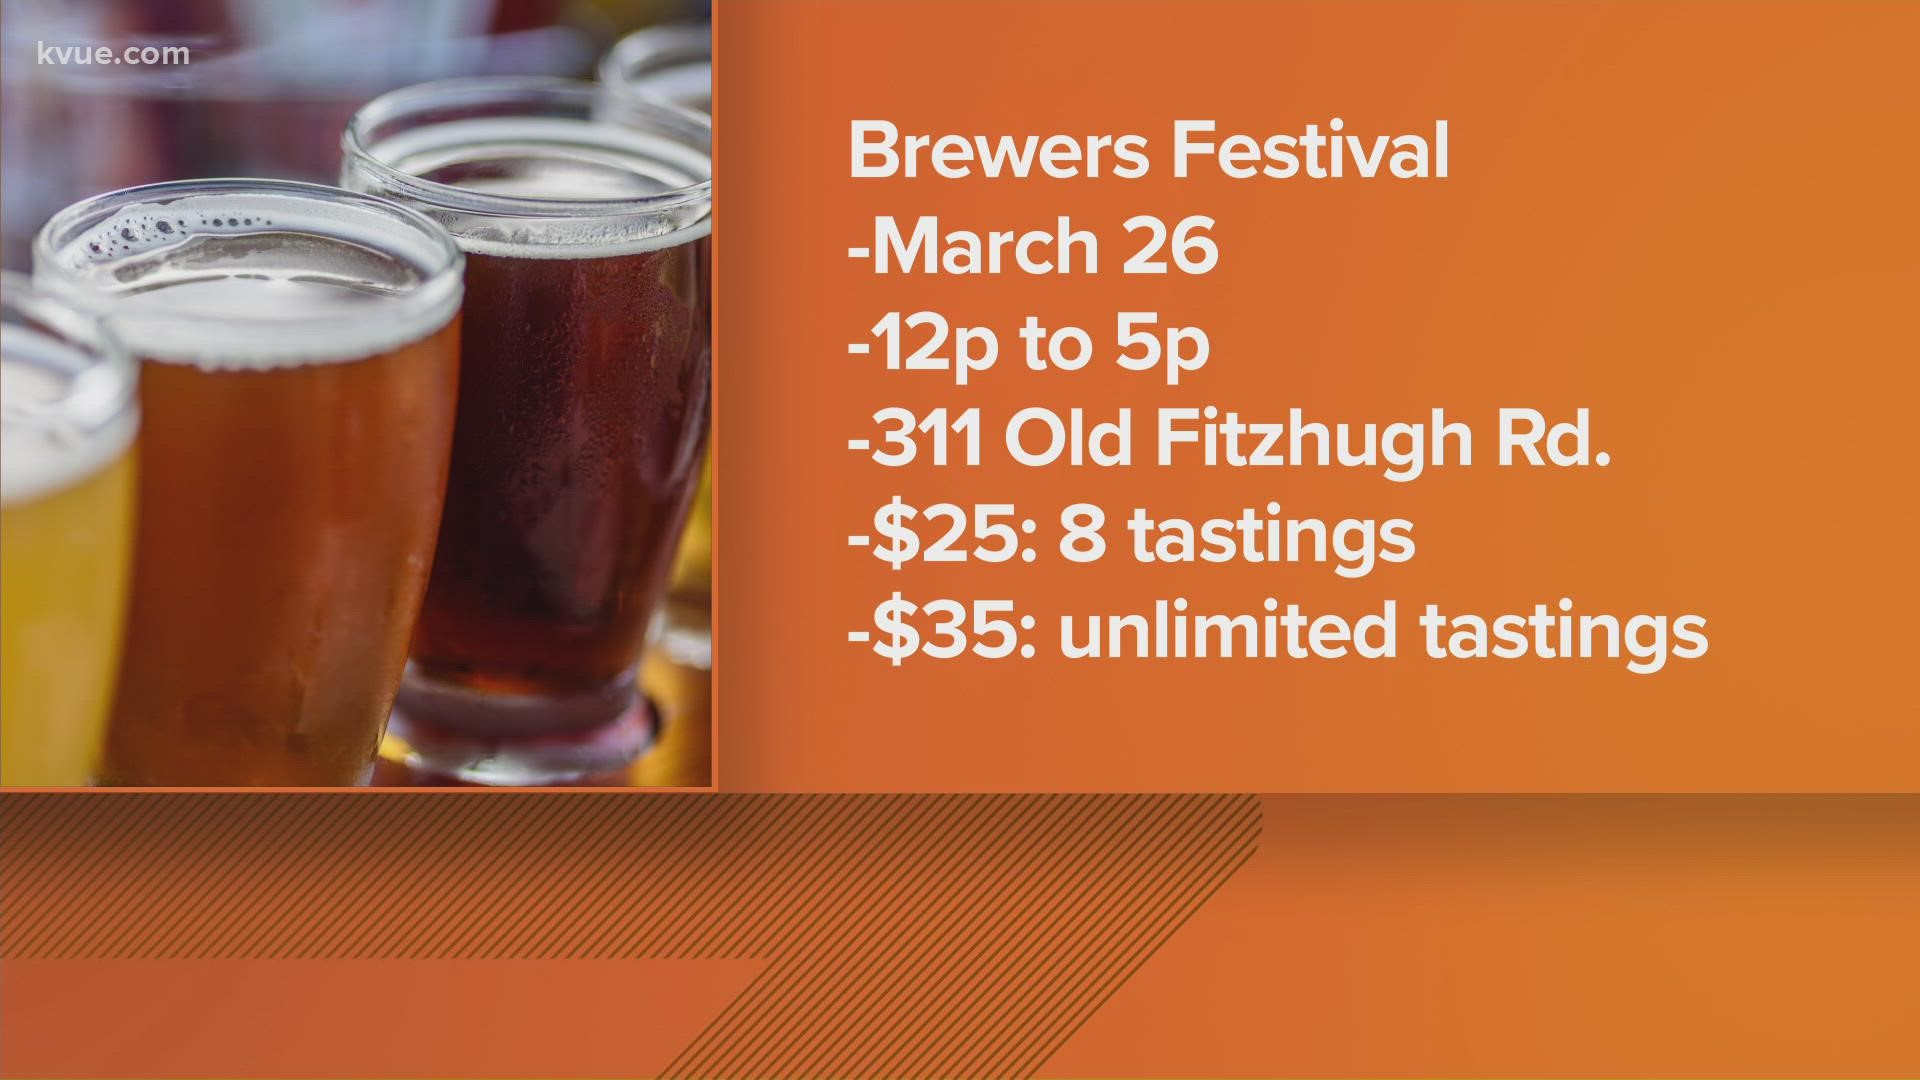 Dripping Springs is launching its first Brewers Festival this month.